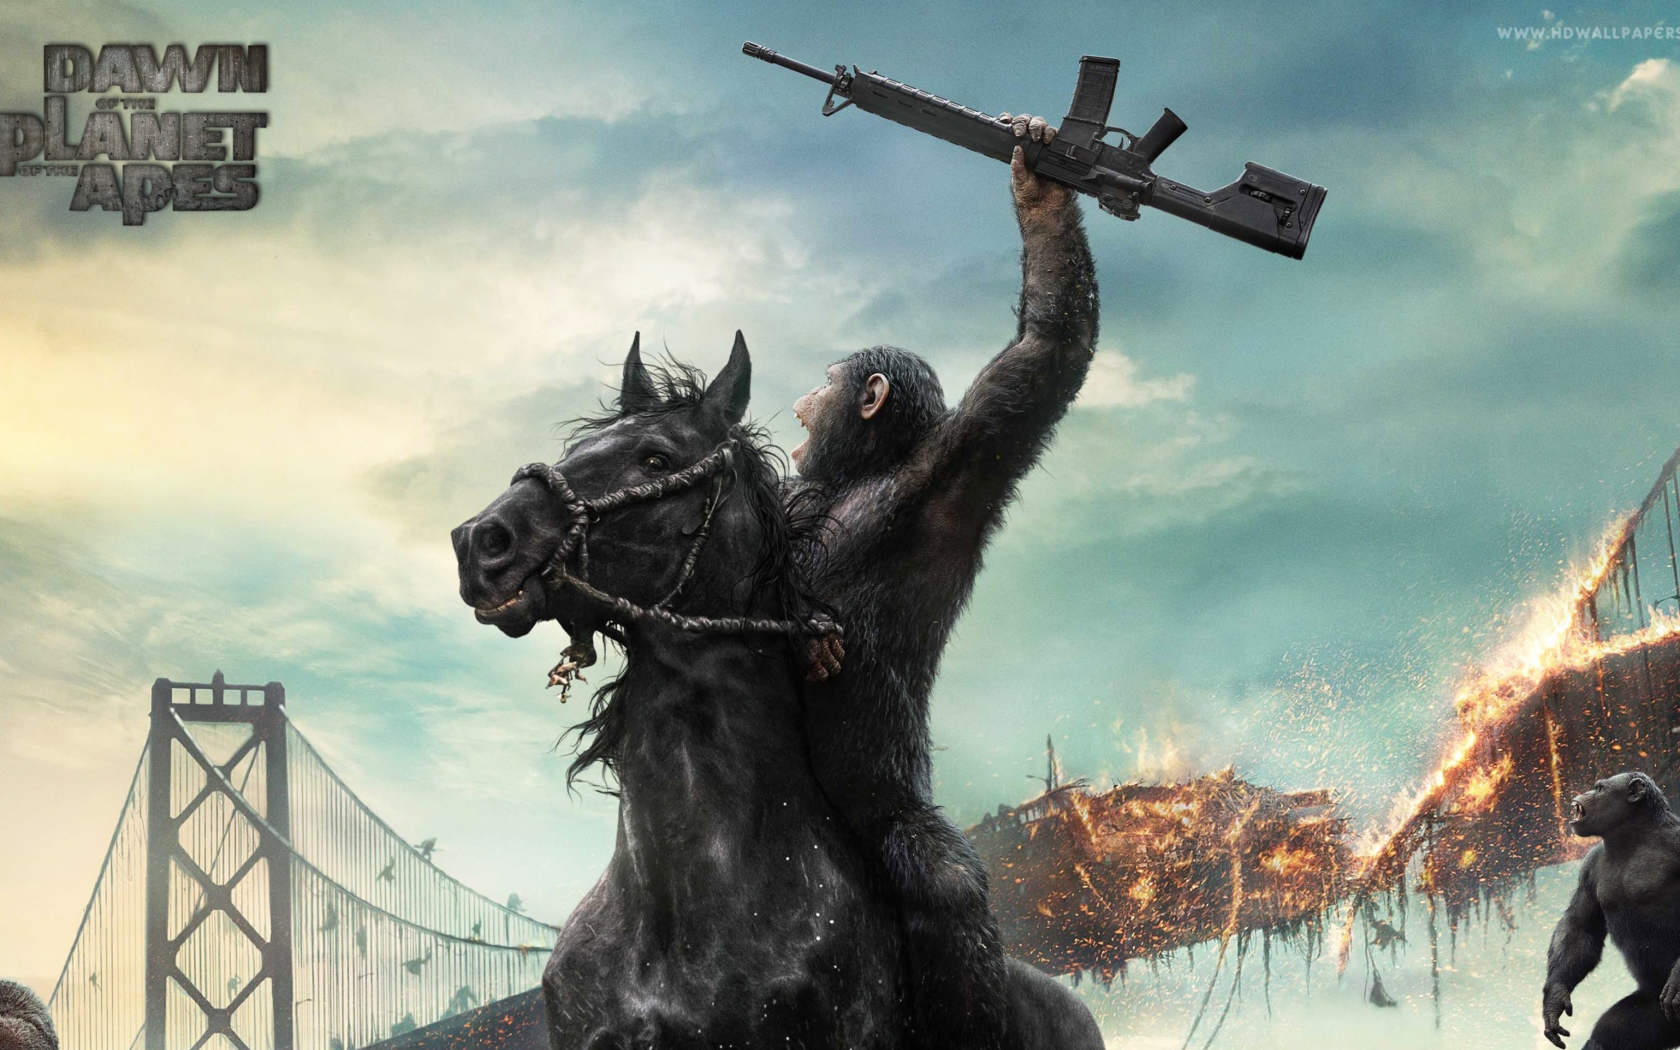 Dawn Of The Planet Of The Apes Movie wallpaper 1680x1050